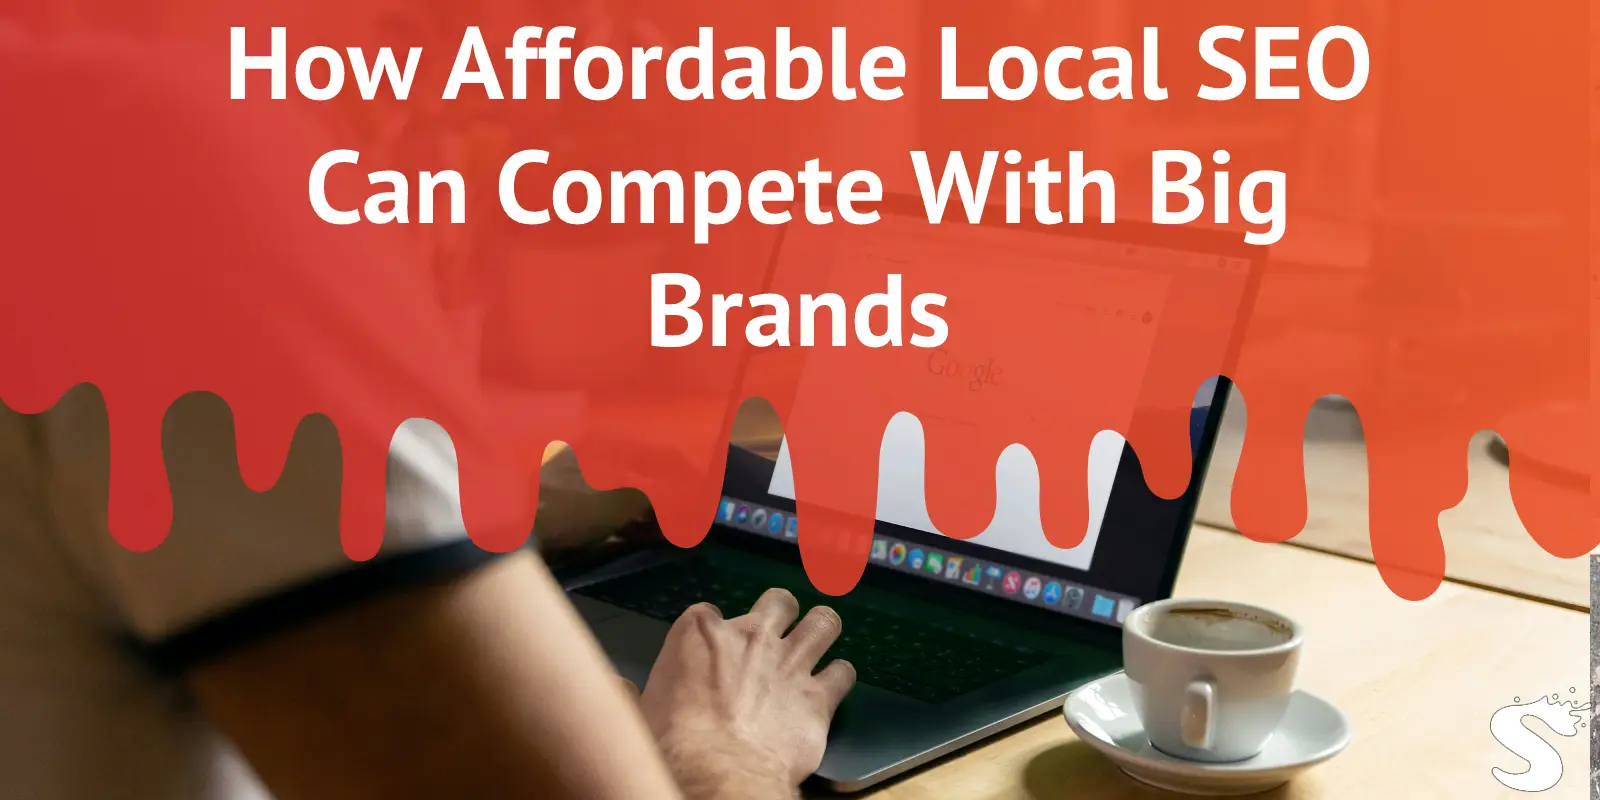 How Affordable Local SEO Can Compete With Big Brands